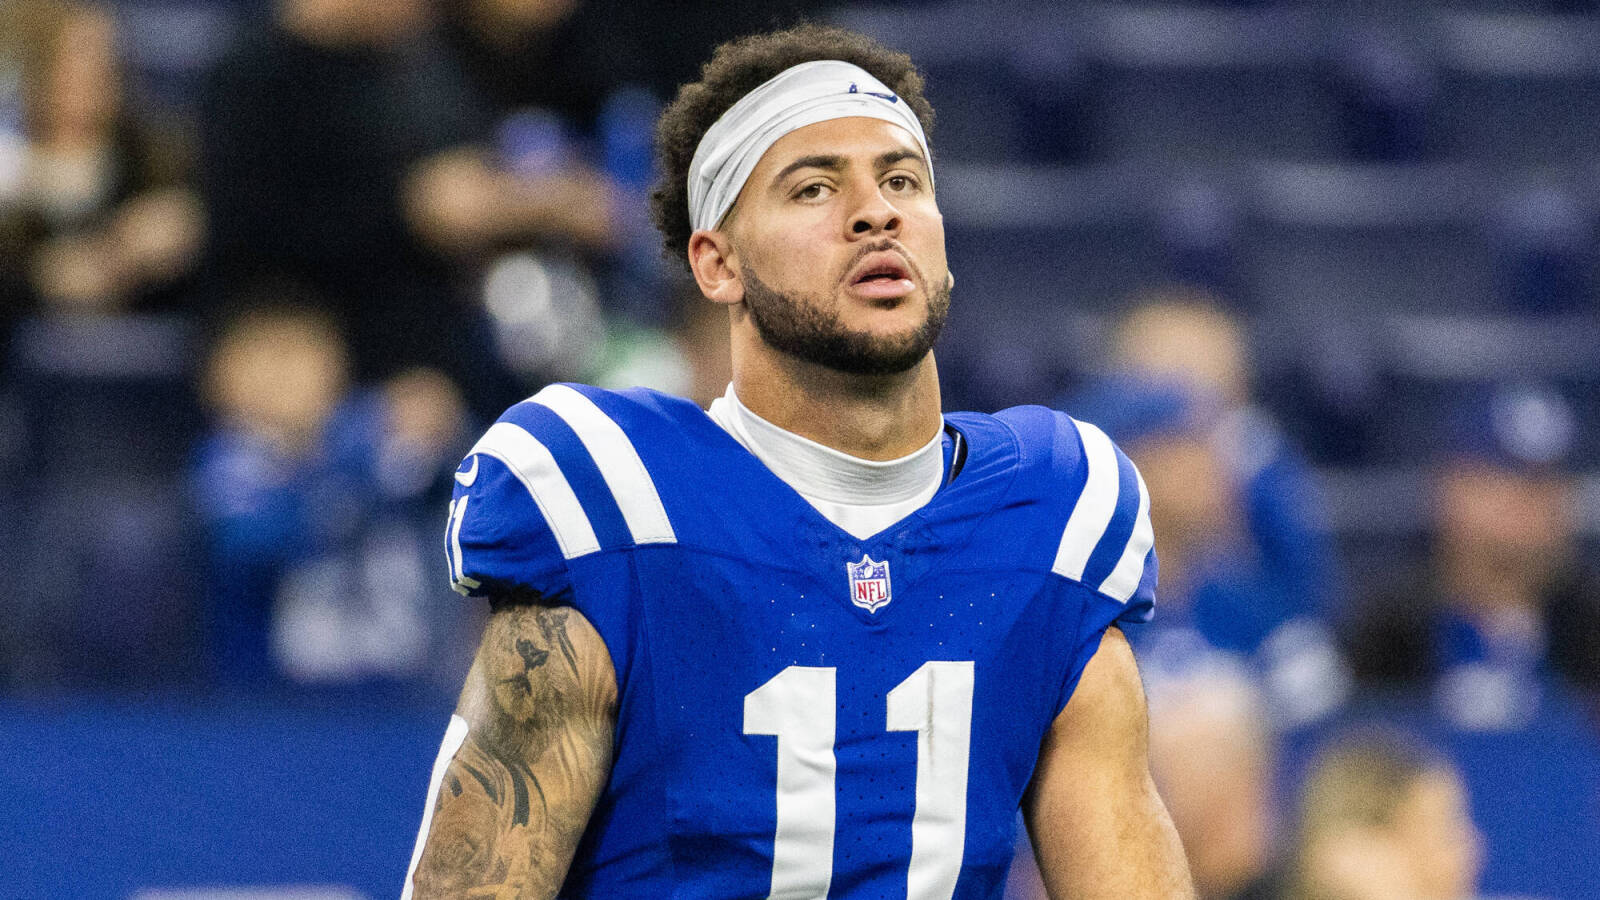 Colts prepared to use franchise tag on top WR